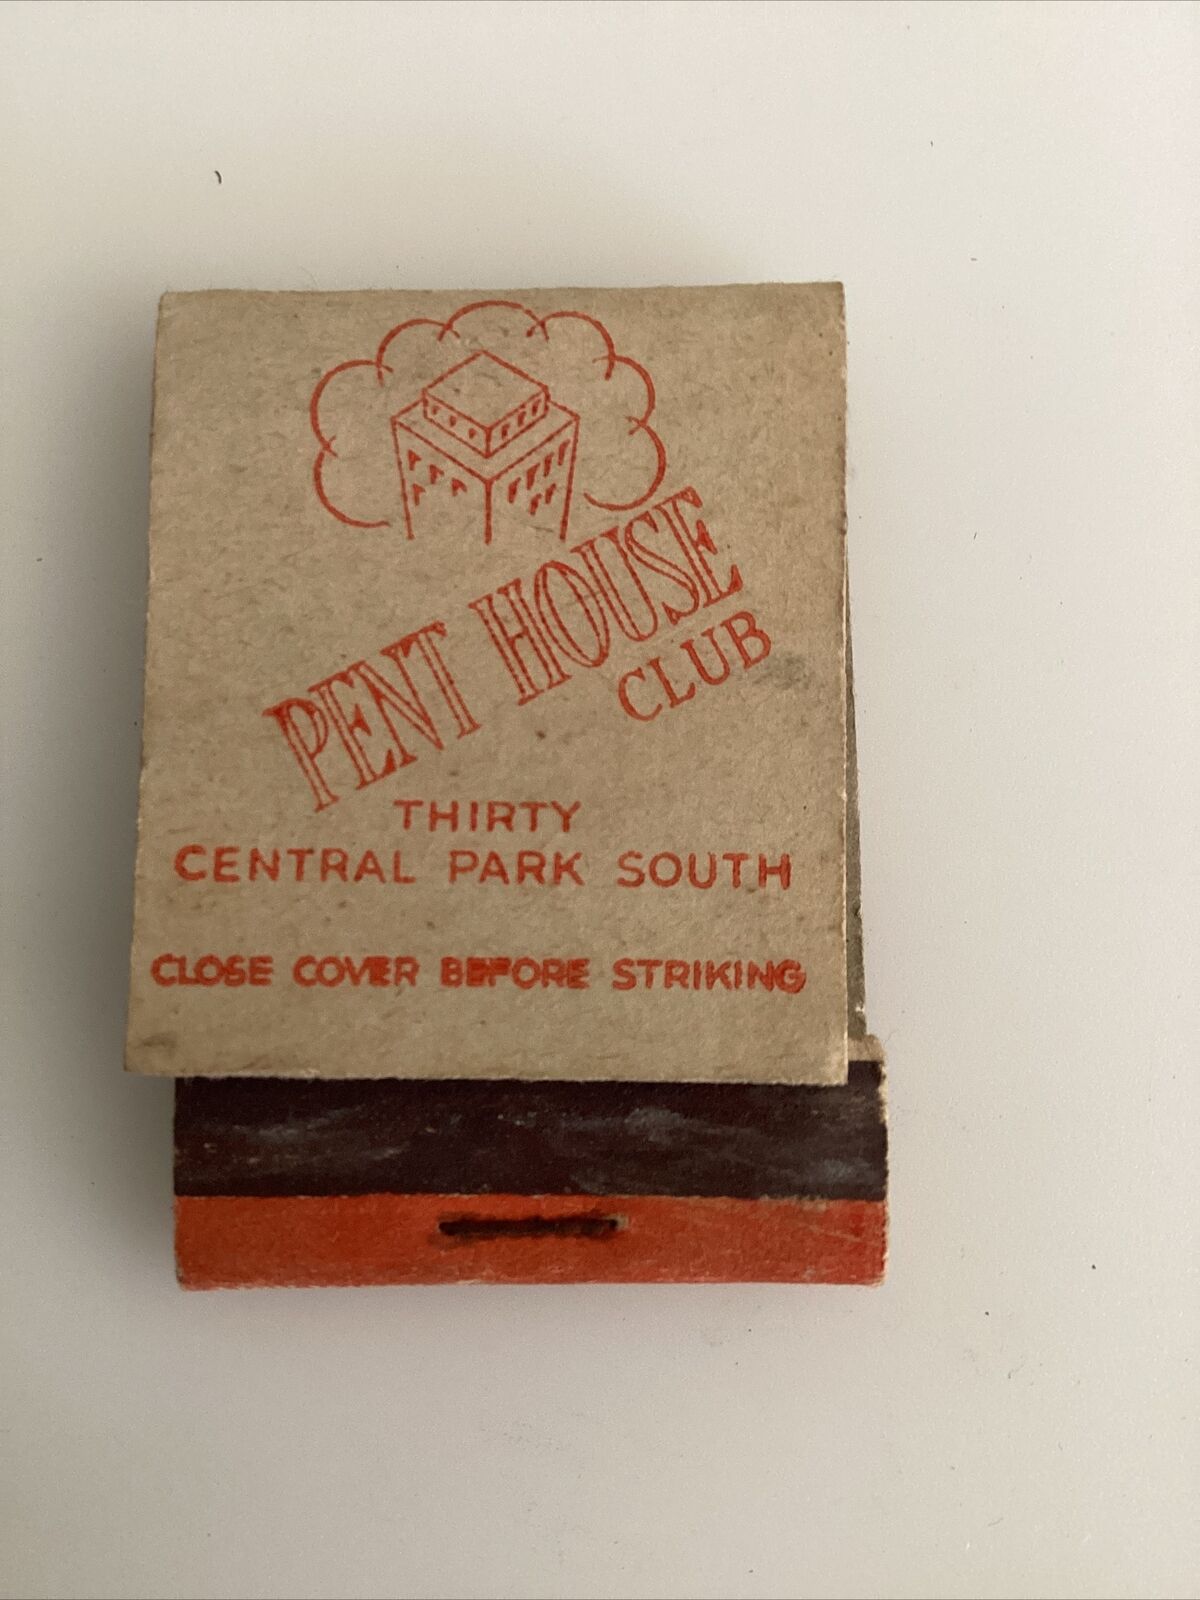 Lion Matchbook Penthouse Club Central Park South NYC New York City Food  Vintage